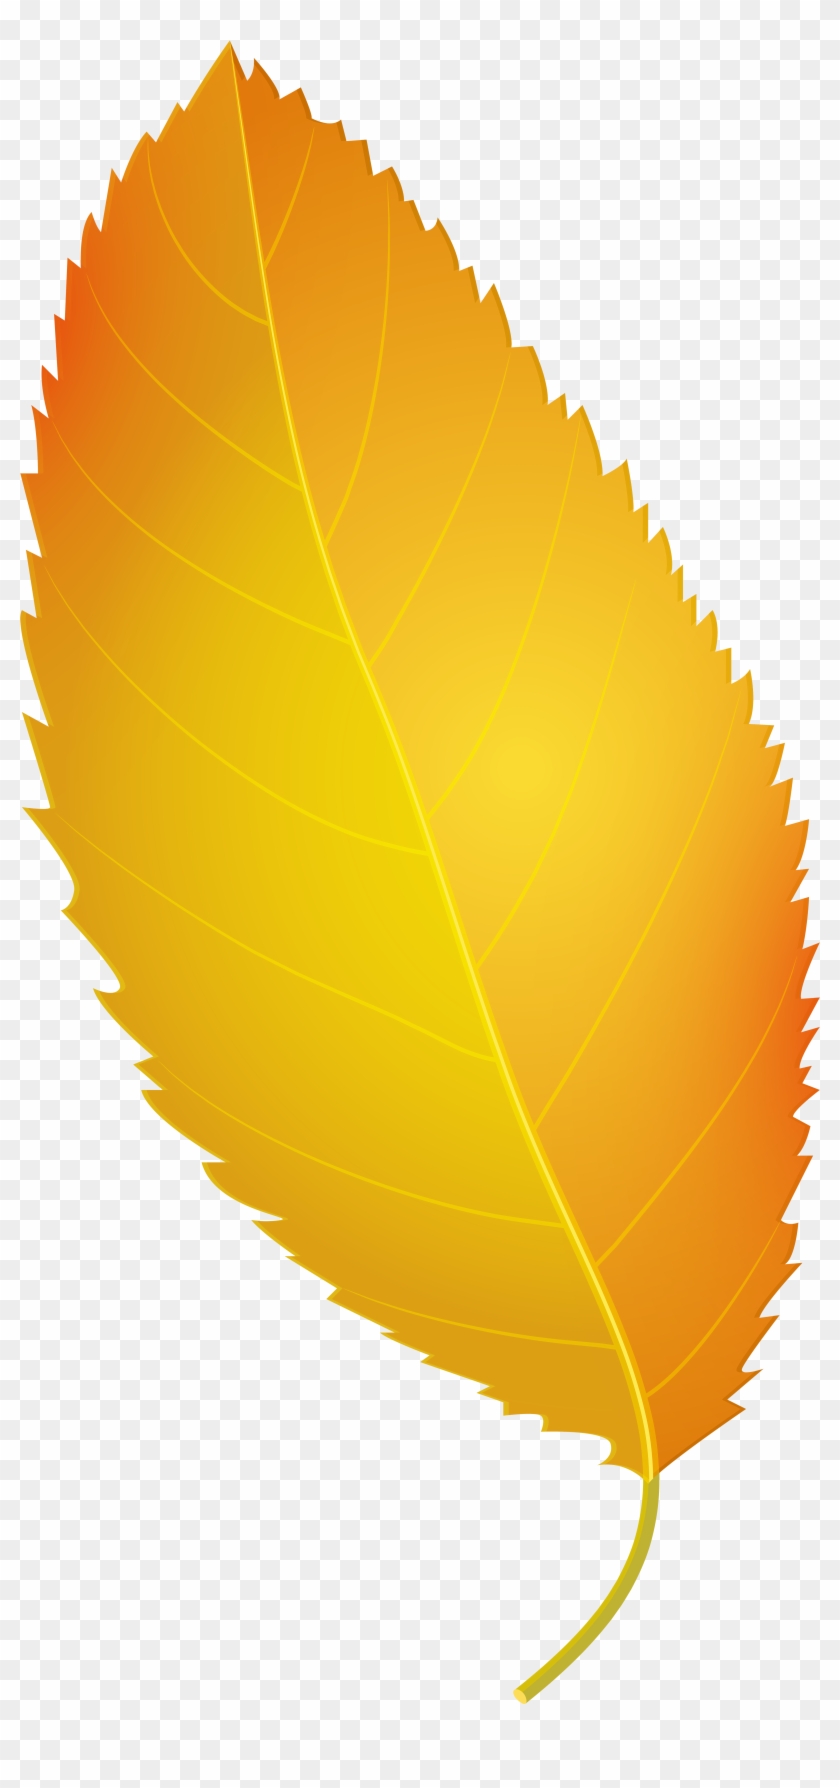 Yellow Autumn Leaf Png Clip Art - Yellow Leaf Png #408899